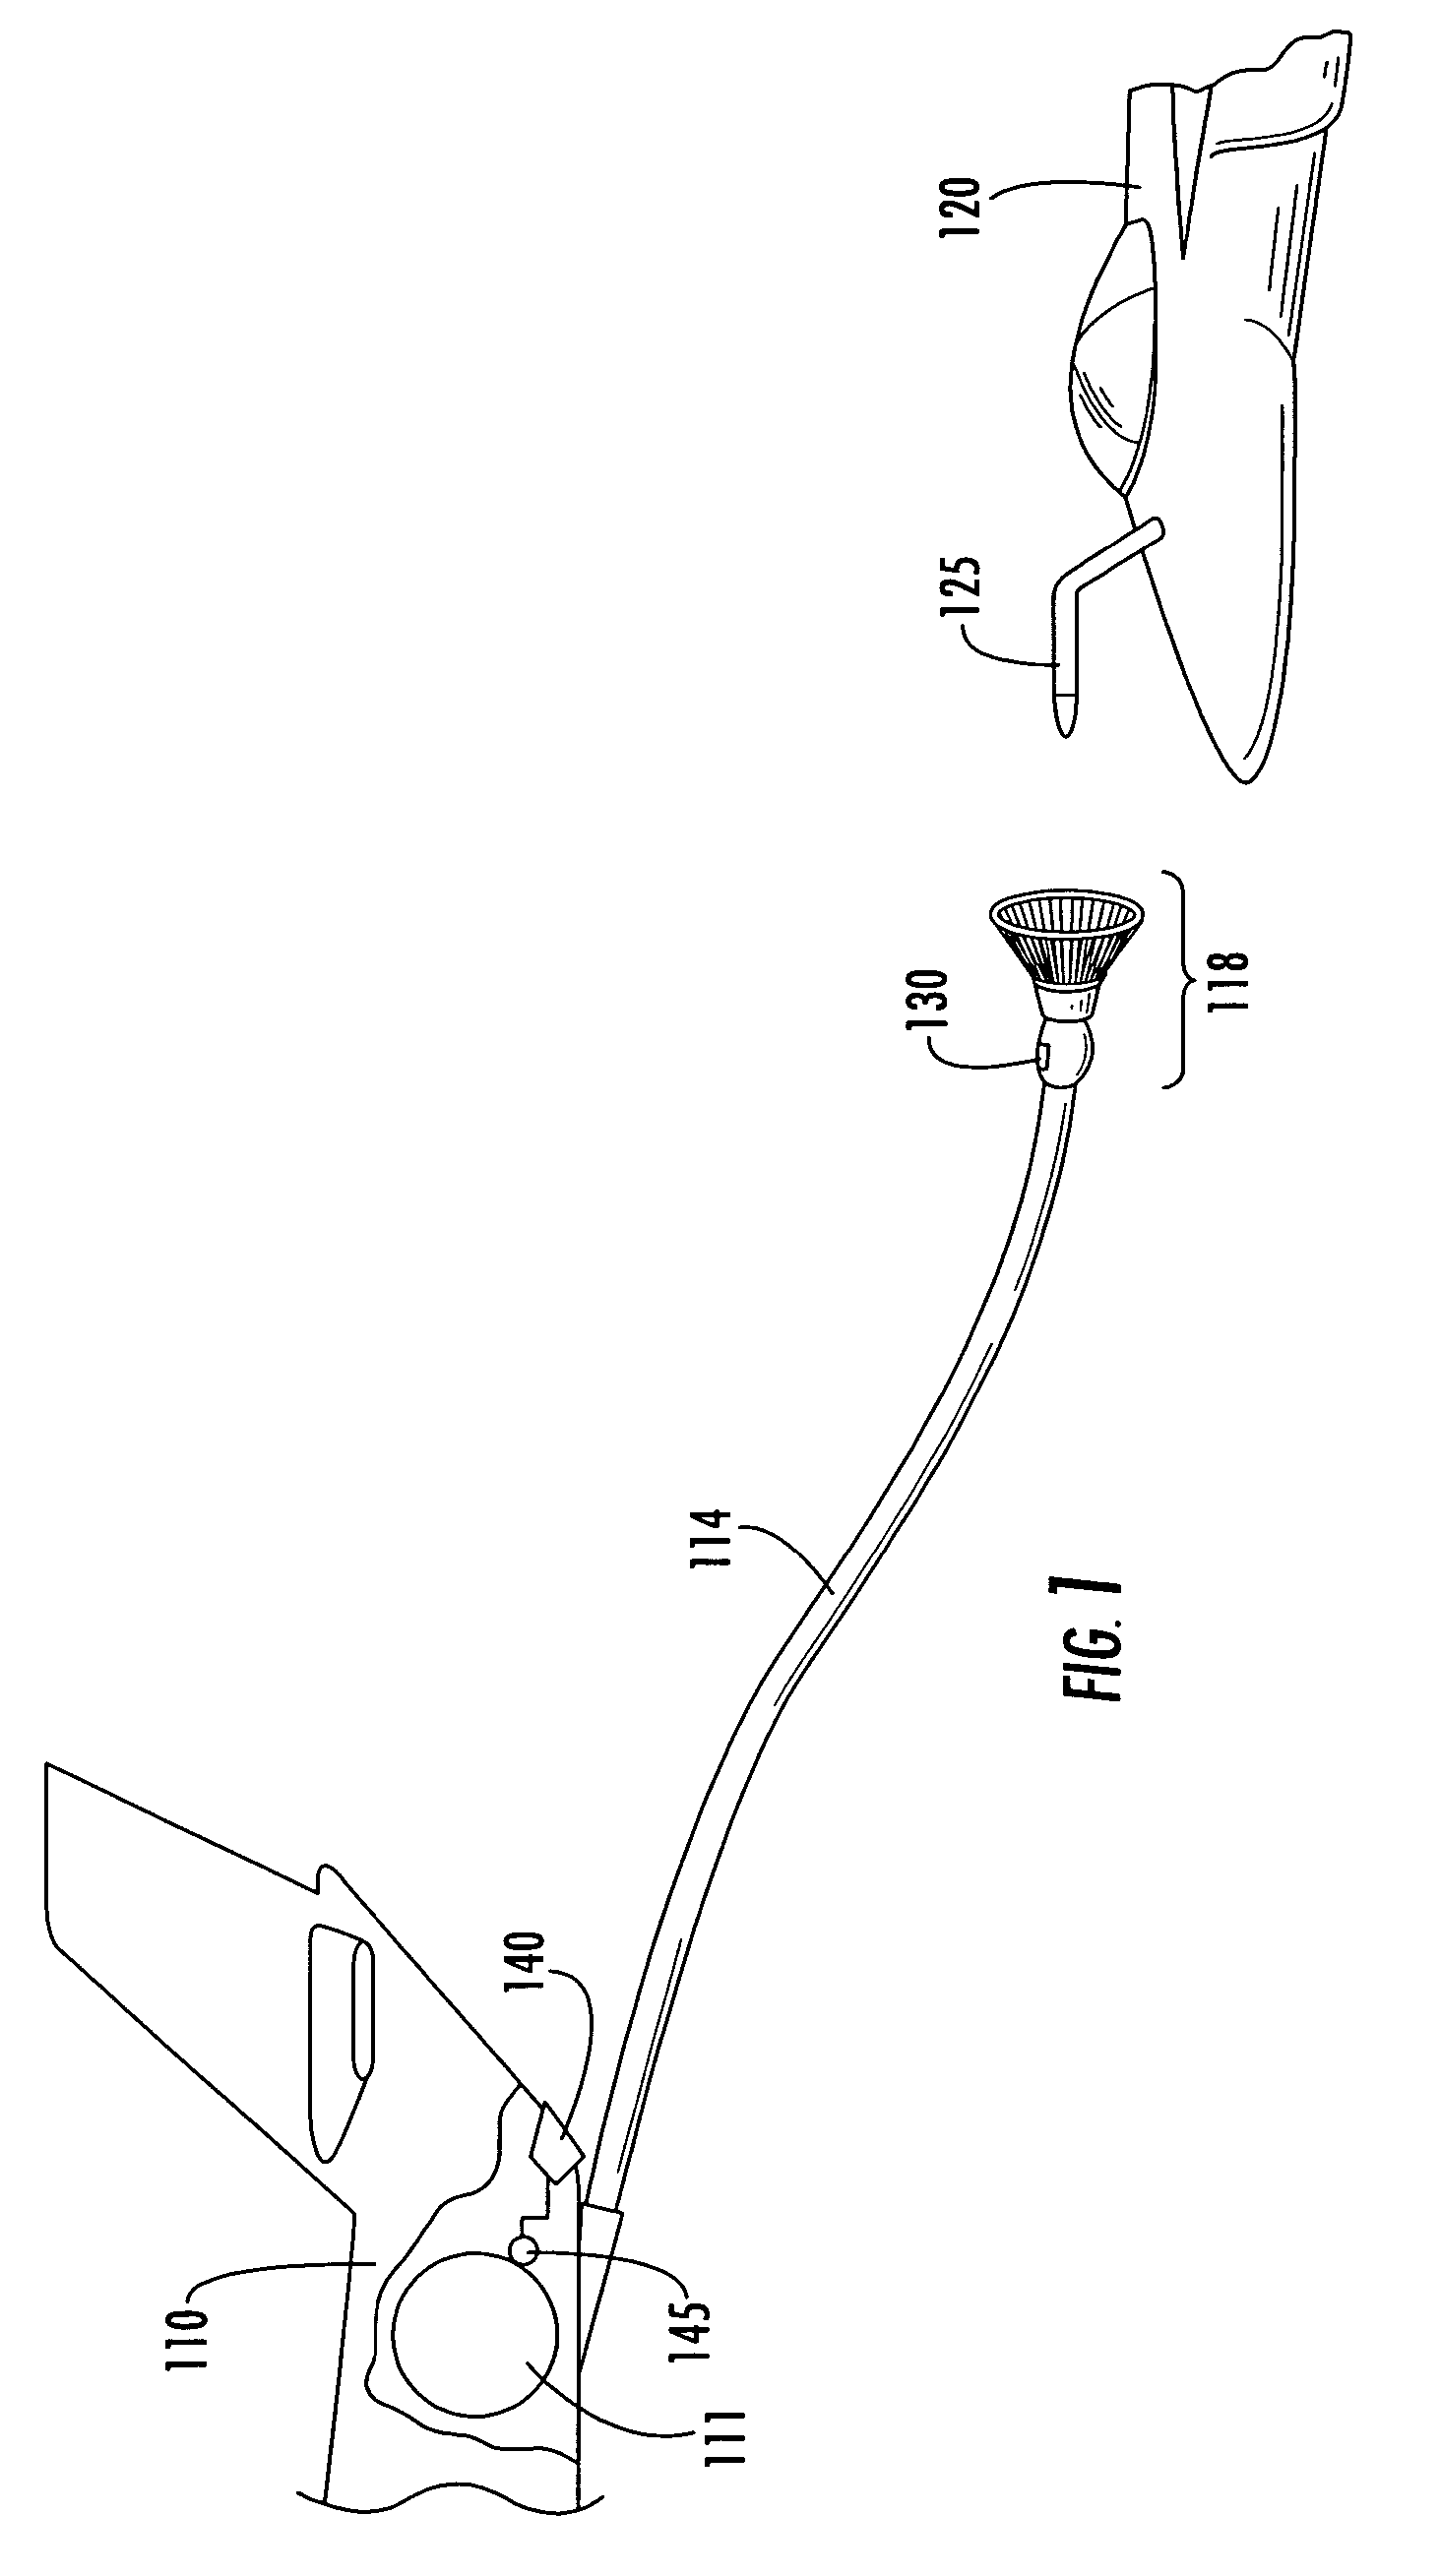 In-flight refueling system, sensor system and method for damping oscillations in in-flight refueling system components